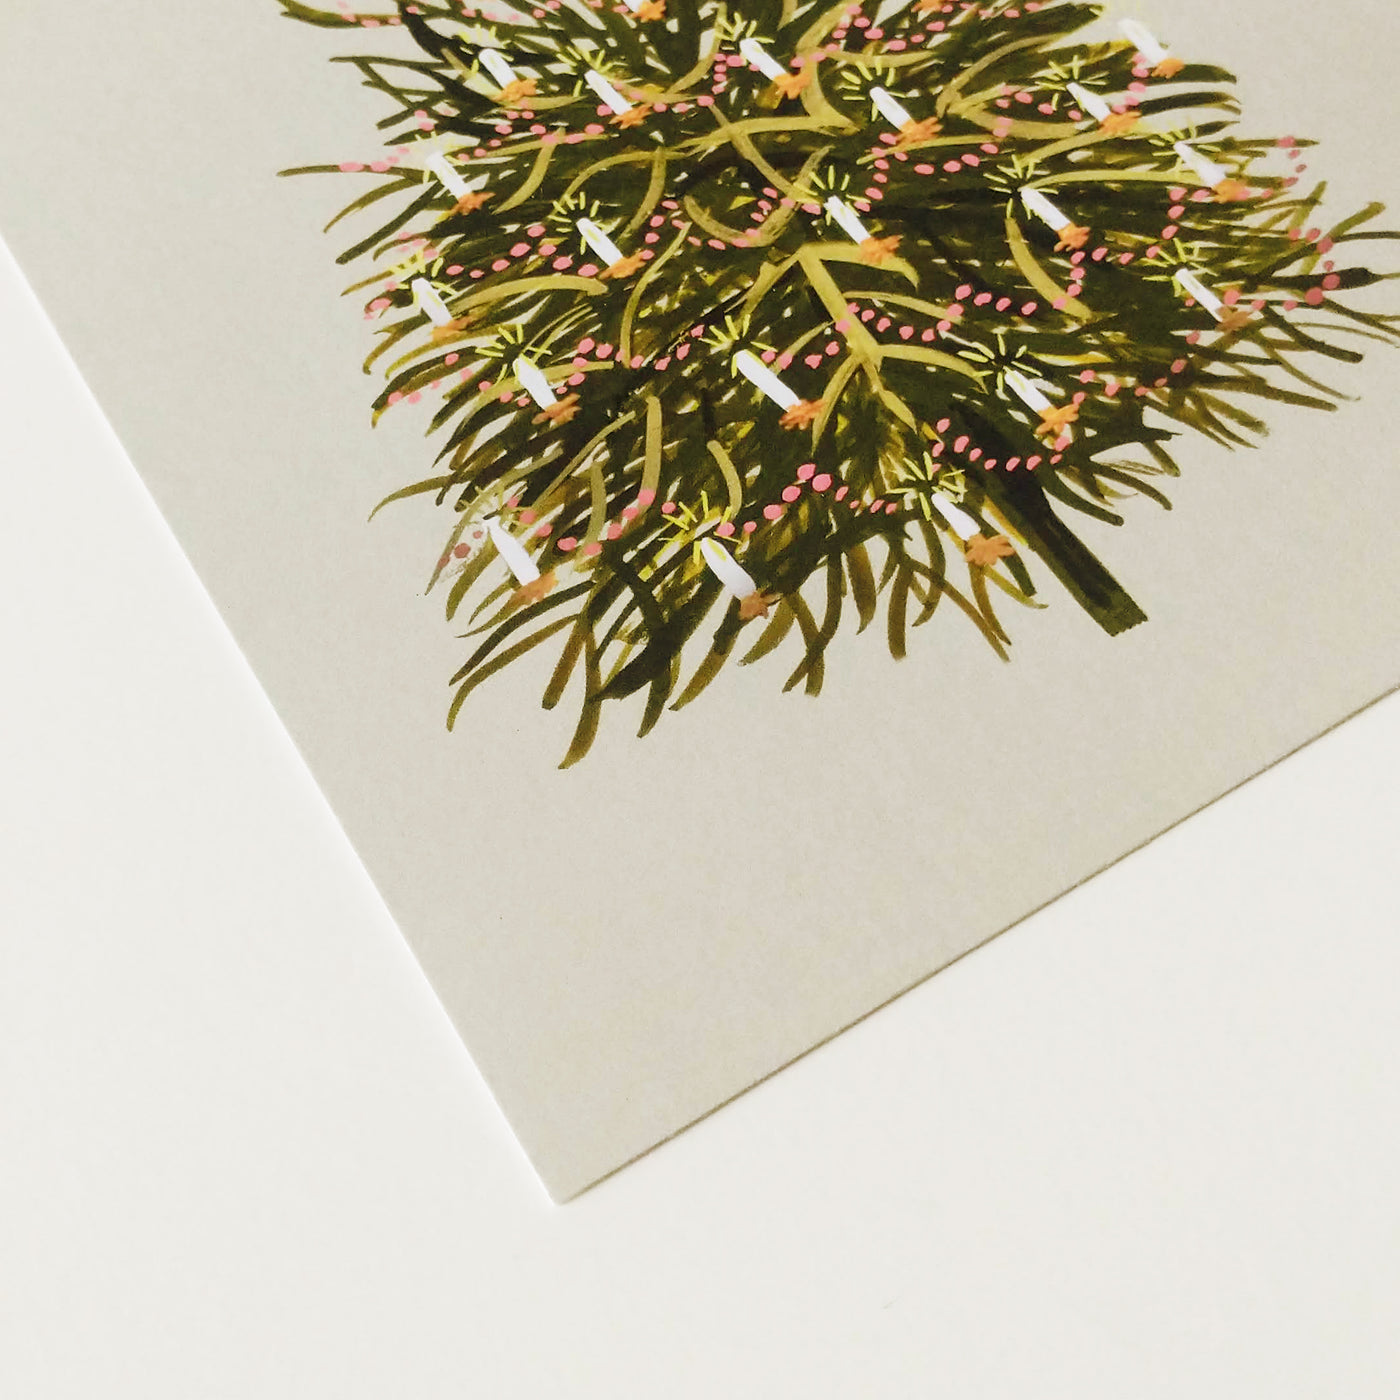 details of the Christmas tree print in A5